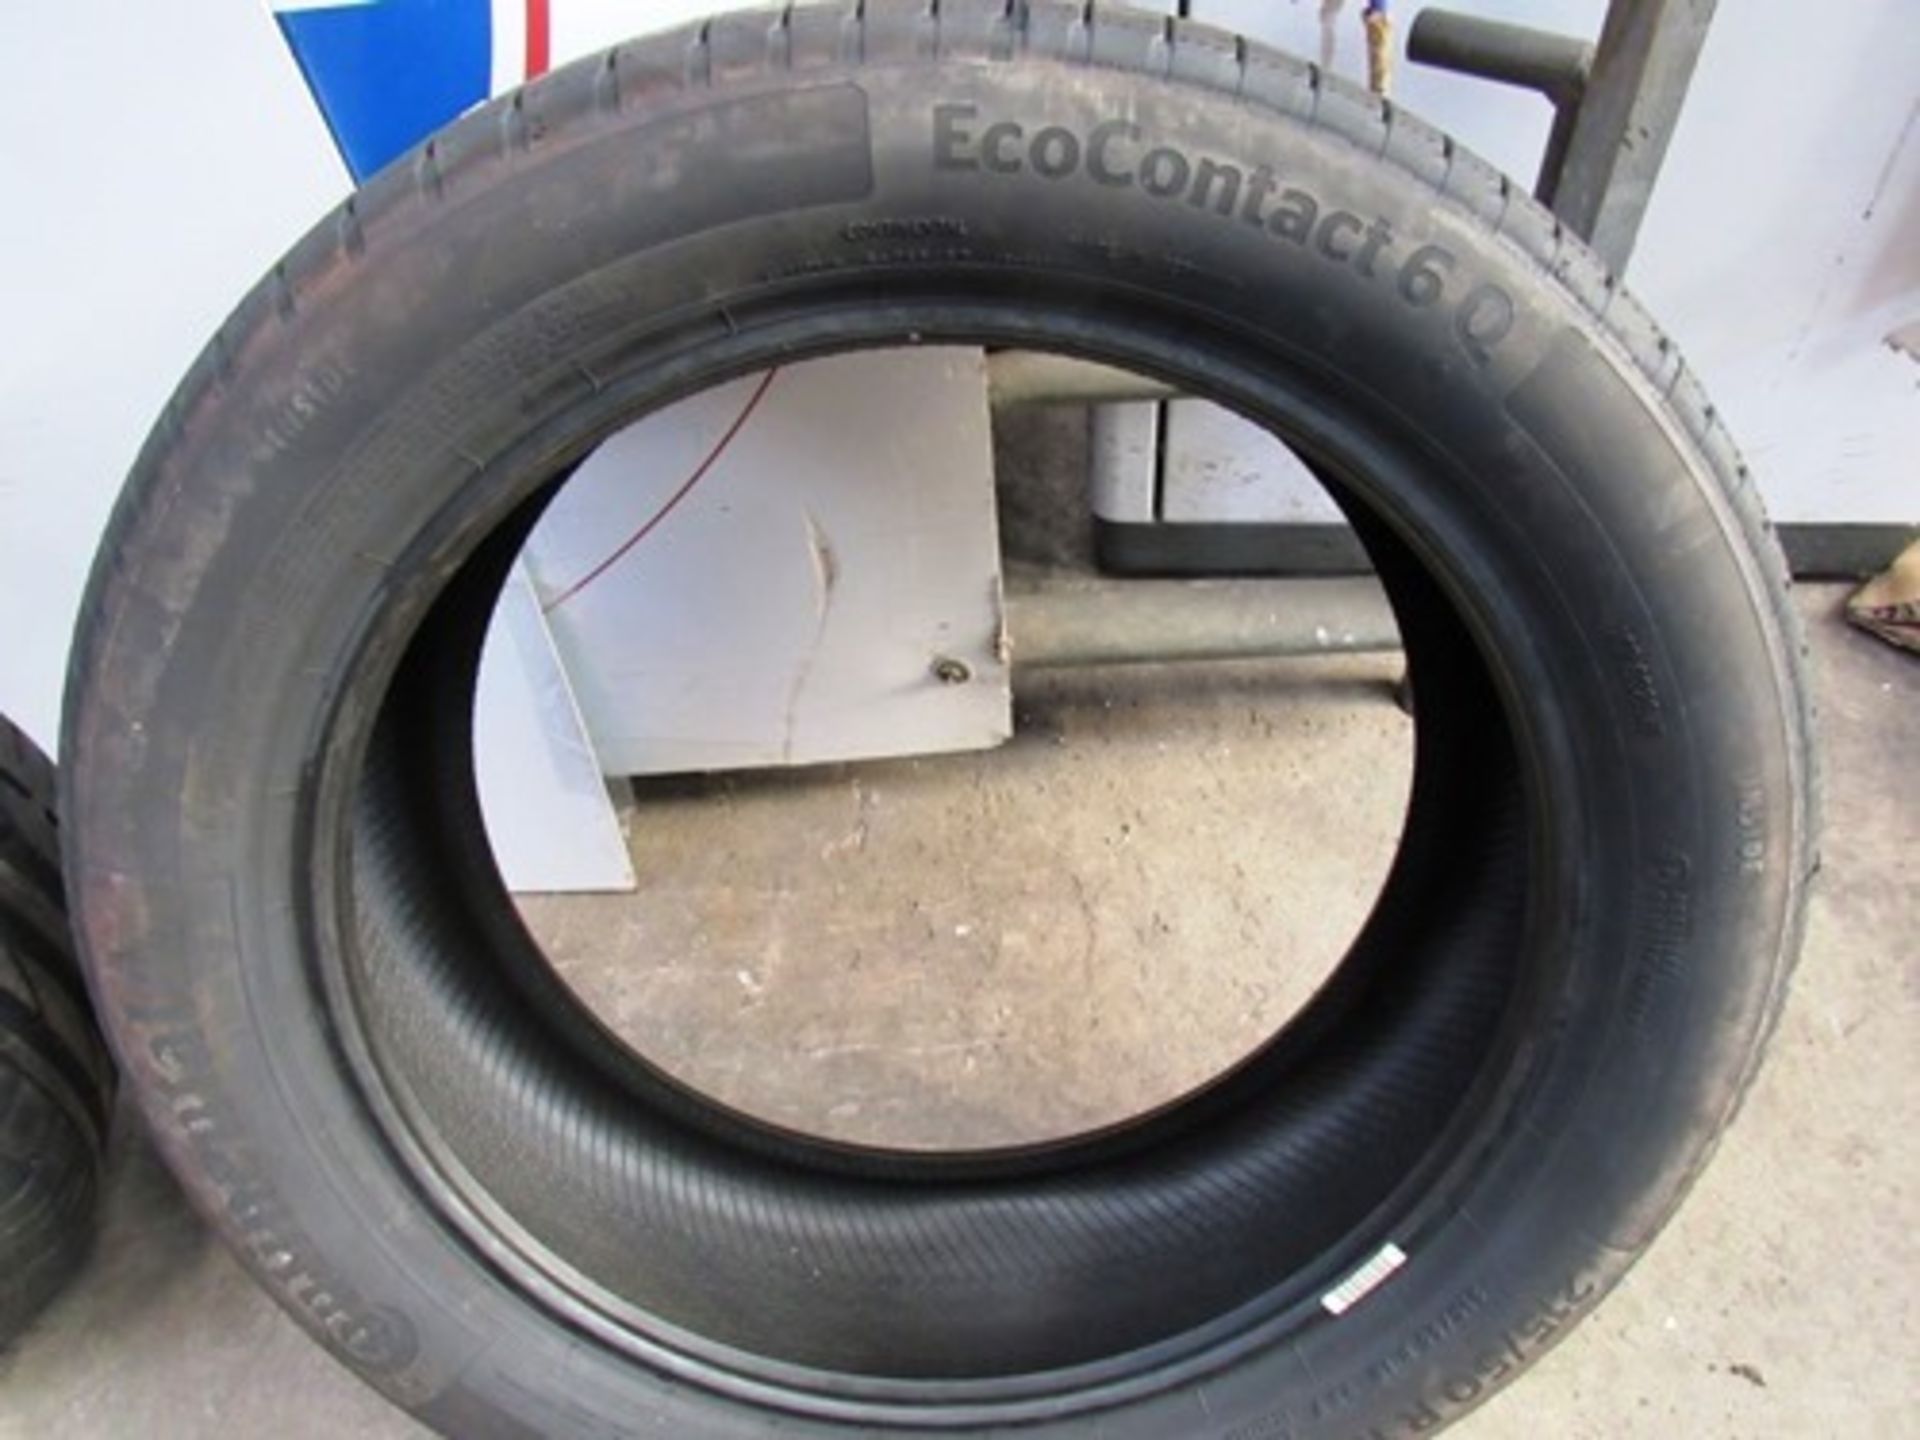 1 x Continental Eco contact 6Q tyre, size 215/50R18 92V - New with label (GS1) - Image 2 of 2